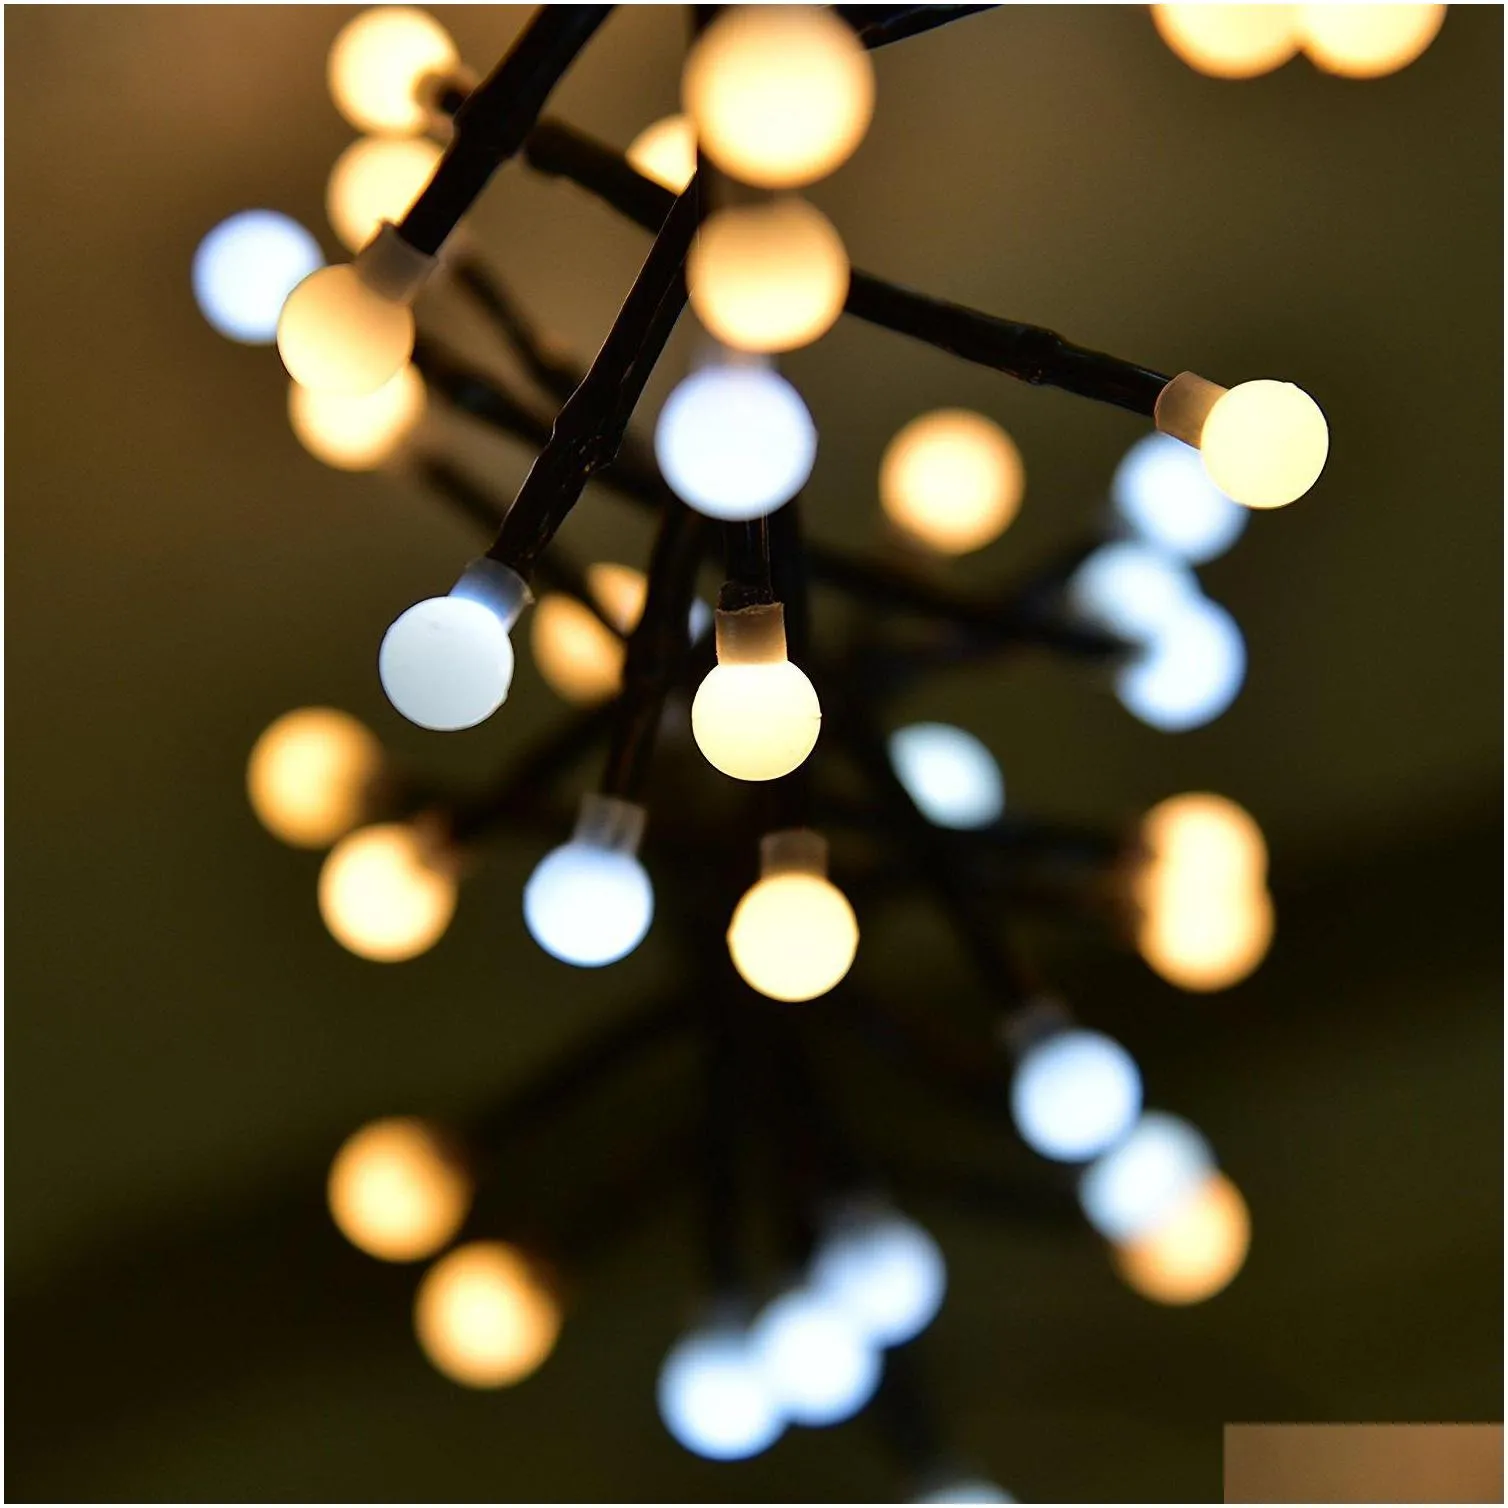  led string lights 400 leds waterproof fairy lights with 8 lighting modes for bedroom garden party patio bistro market cafe